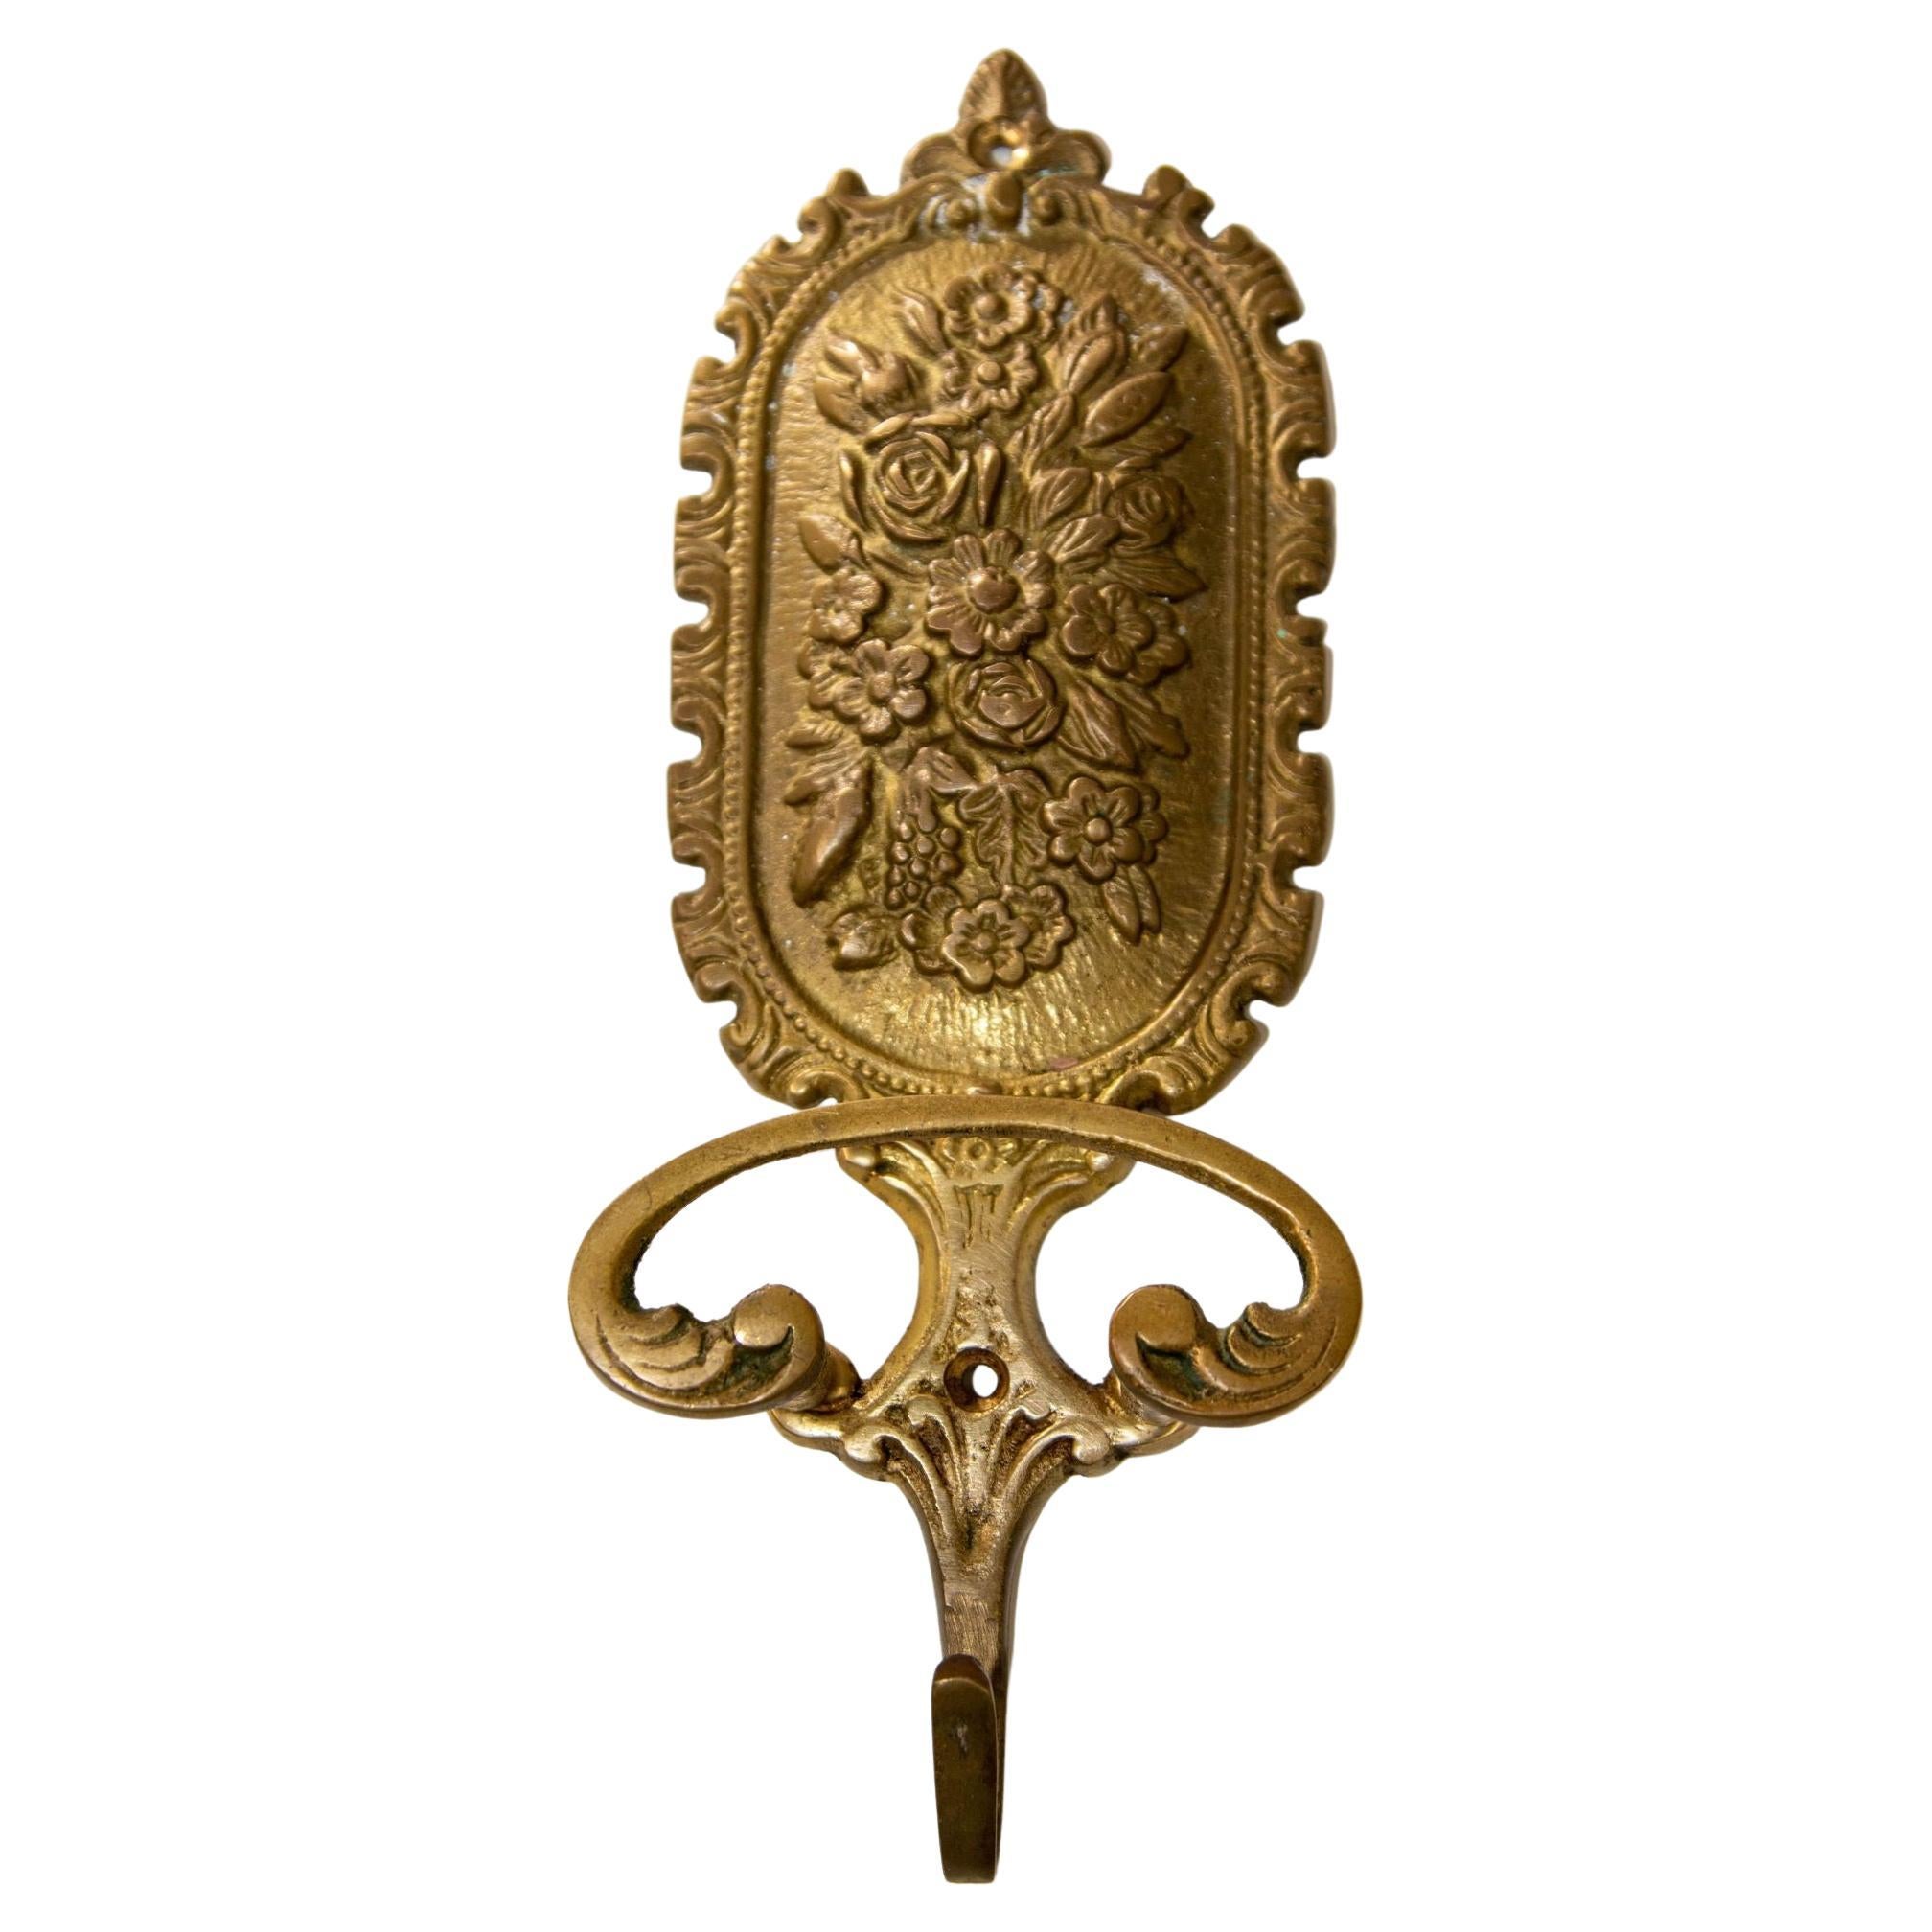 Architectural Italian Cast Brass Floral Wall Hook Decor Made in Italy